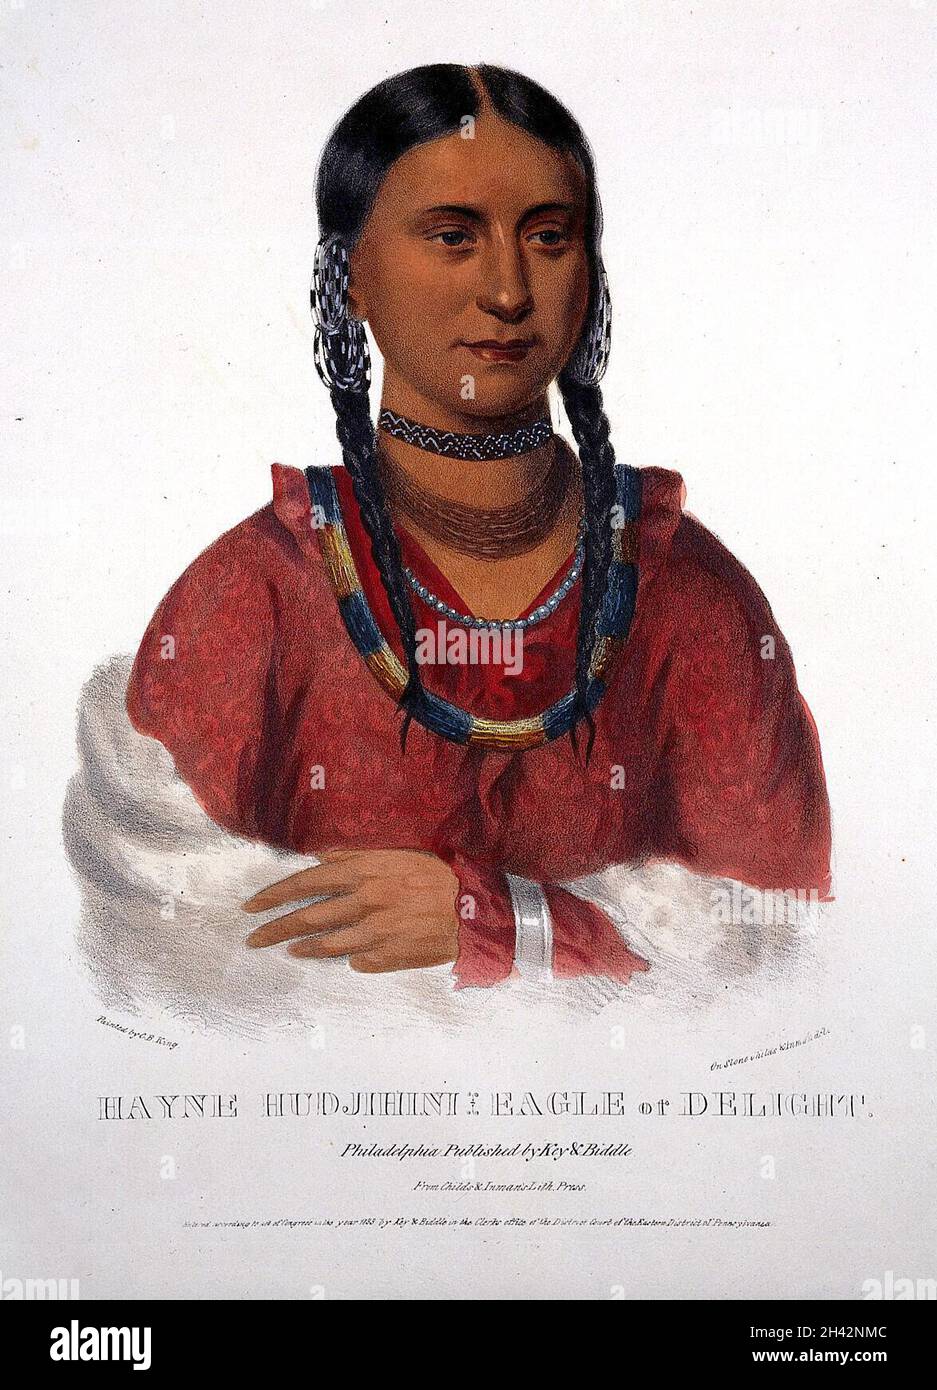 Eagle of Delight, a native American woman of the Oto (Otoe) tribe. Coloured lithograph by Childs & Inman after C. B. King, 1833. Stock Photo